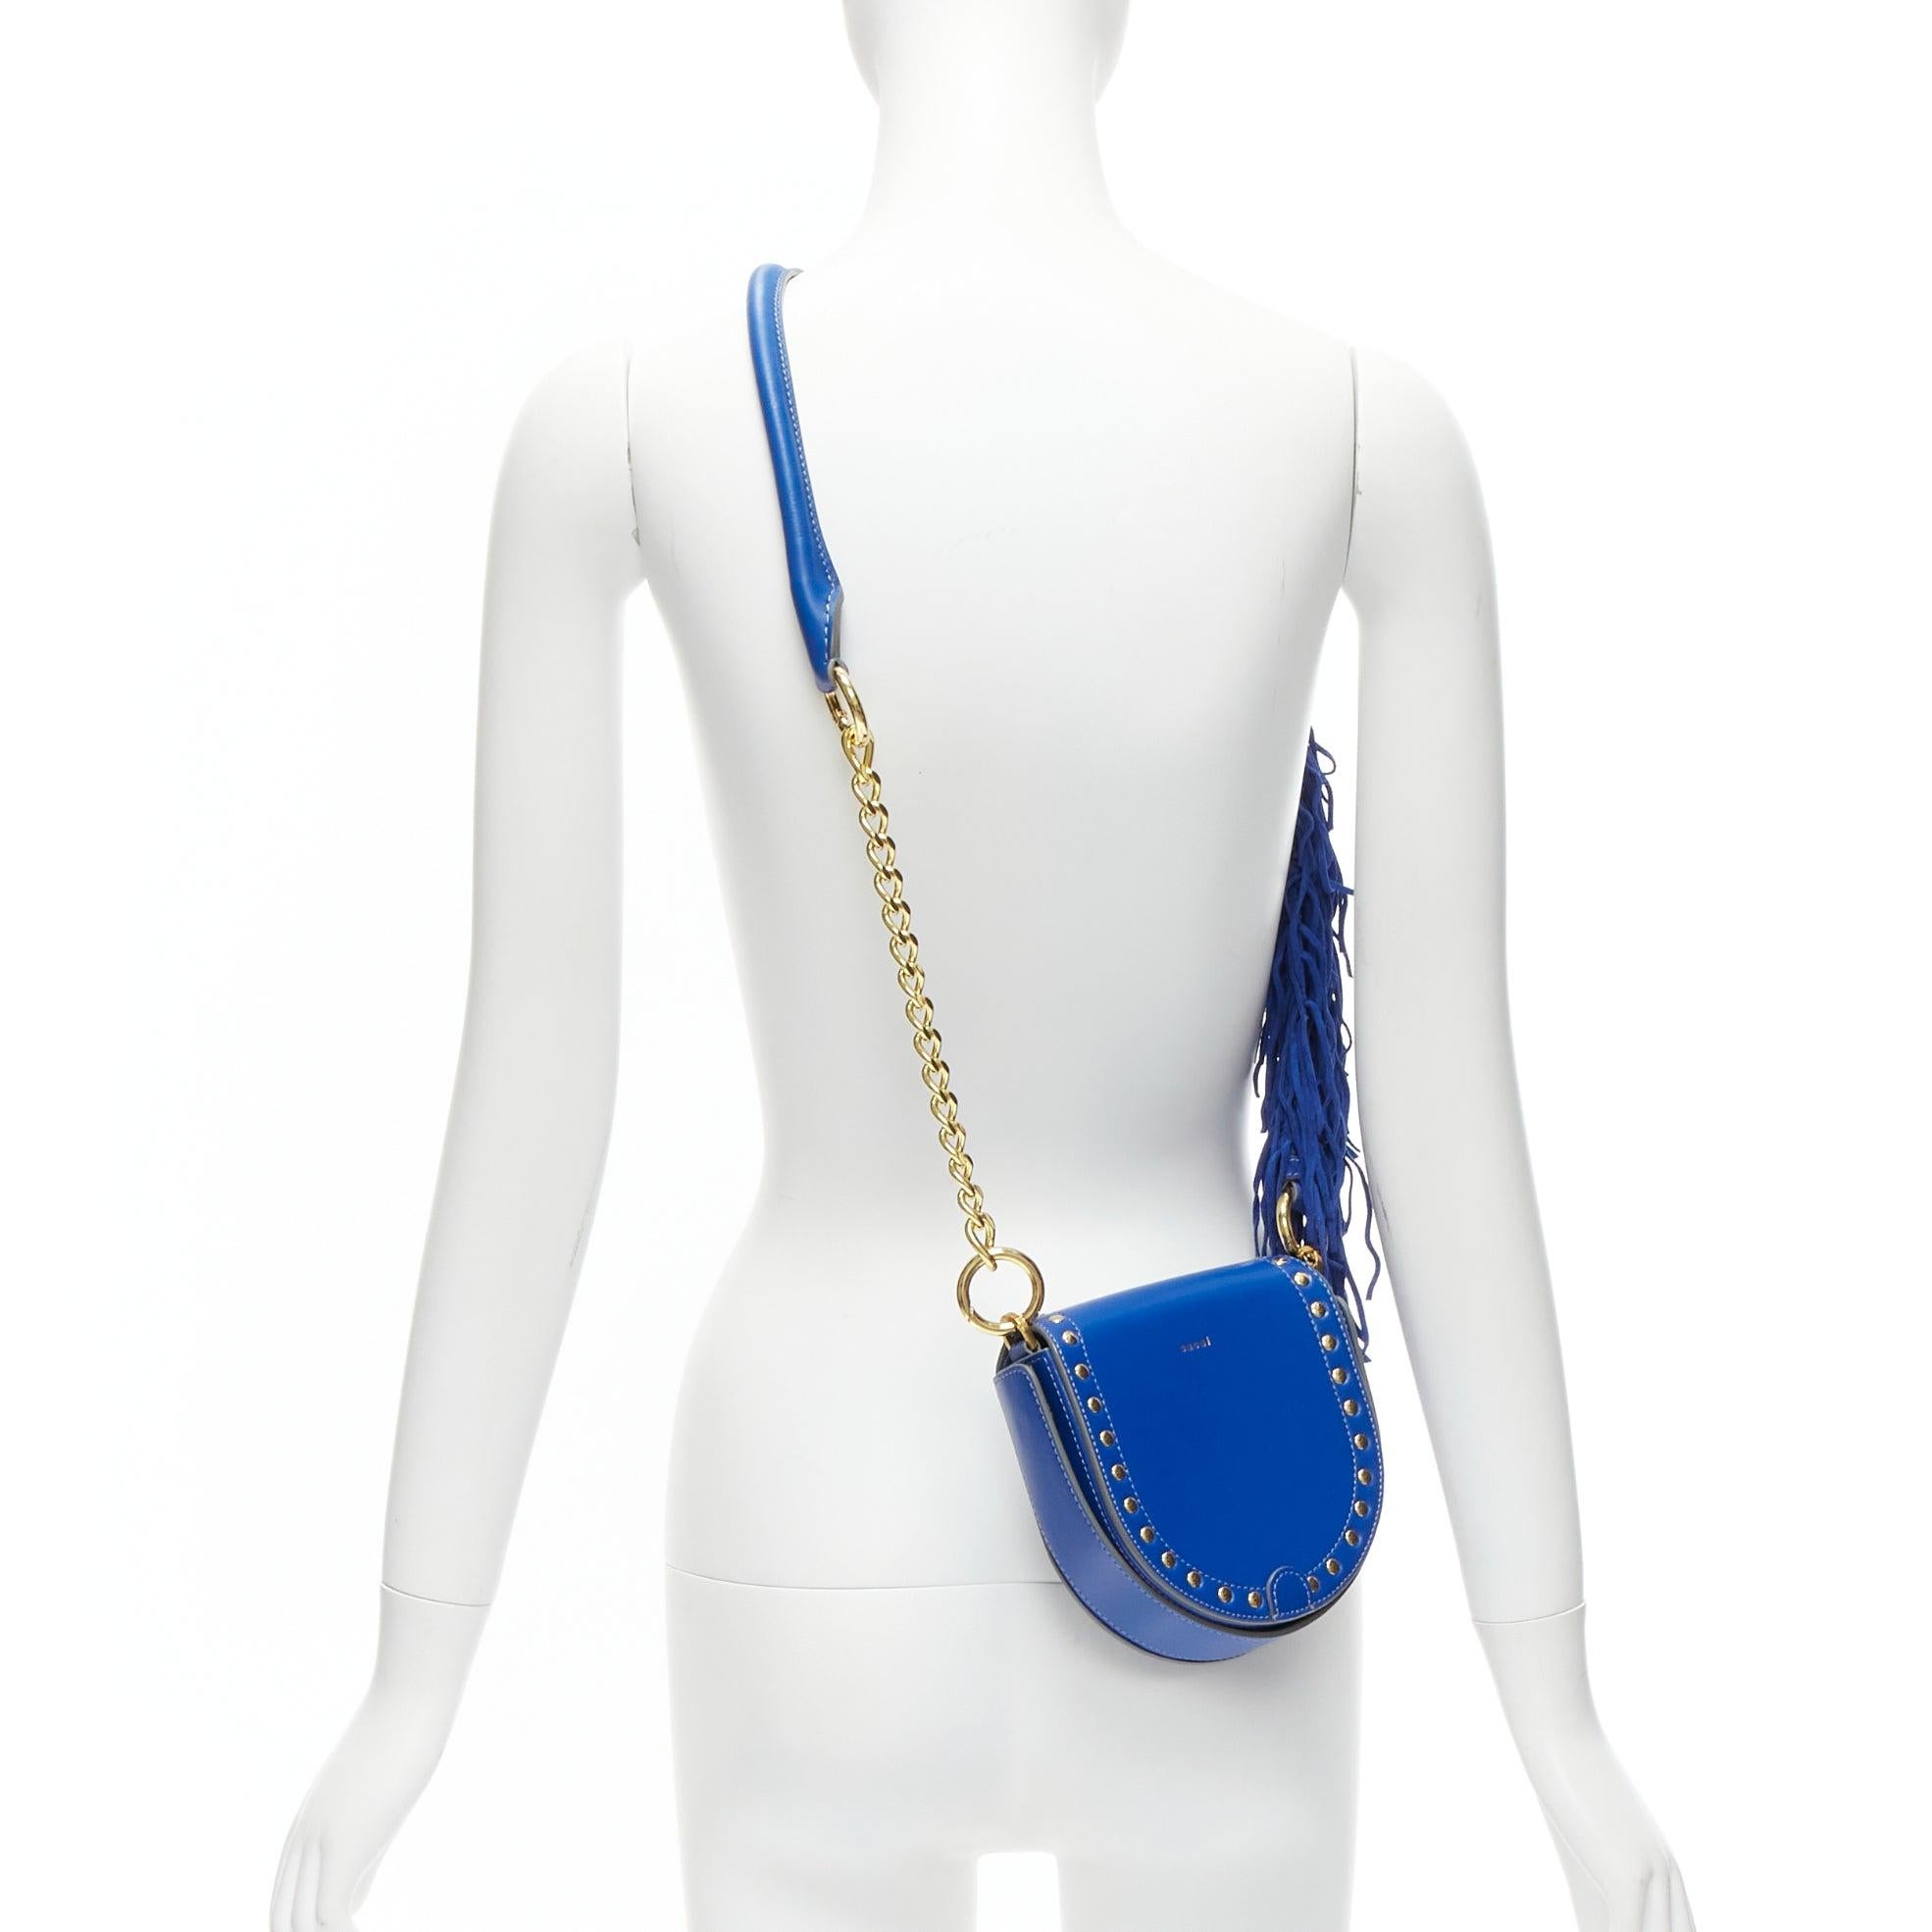 SACAI Horseshow cobalt blue leather suede fringe studs crossbody bag
Reference: BSHW/A00072
Brand: Sacai
Designer: Chitose Abe
Model: Horseshoe
Material: Leather
Color: Blue, Gold
Pattern: Solid
Lining: Blue Leather
Extra Details: Interchangeable